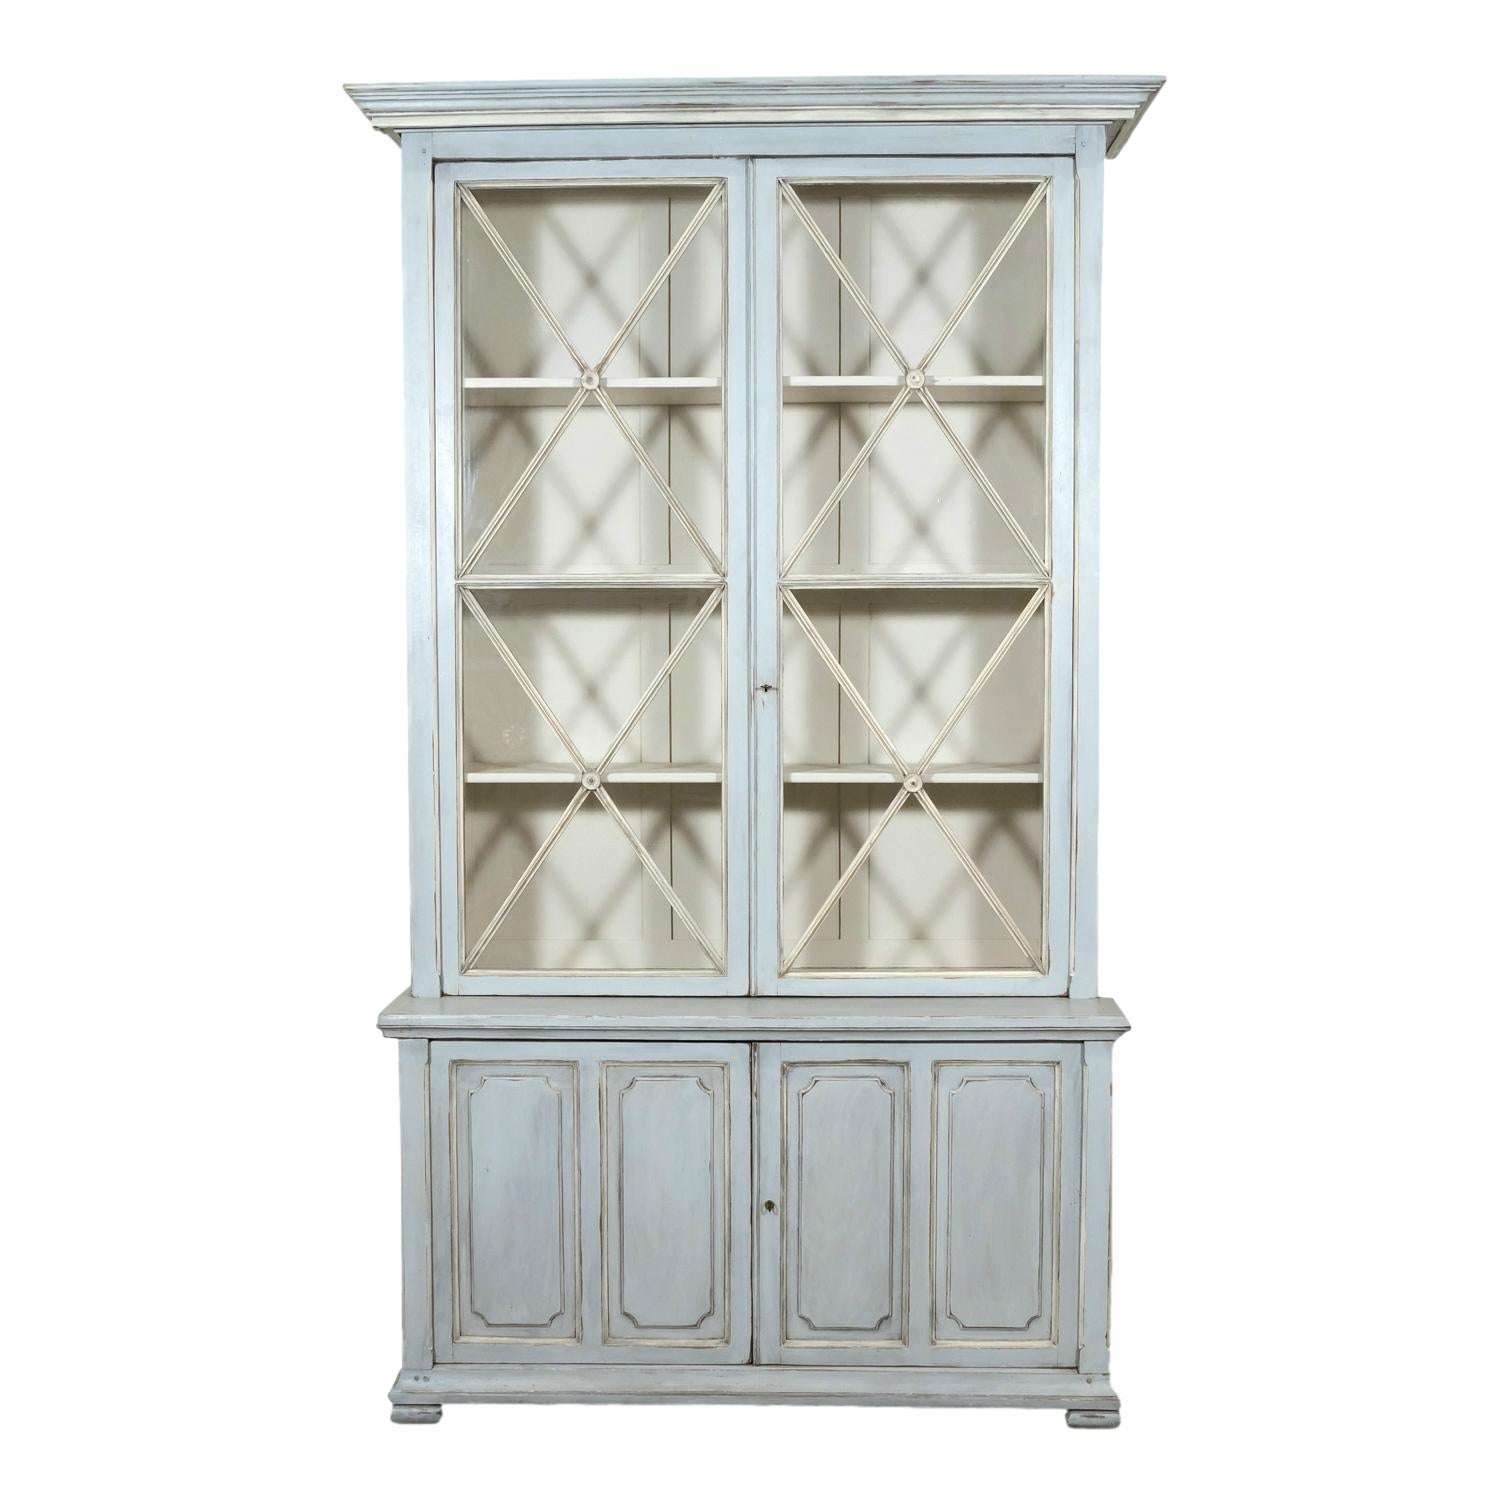 Large 19th Century French Directoire Period Painted Bookcase or Display Cabinet For Sale